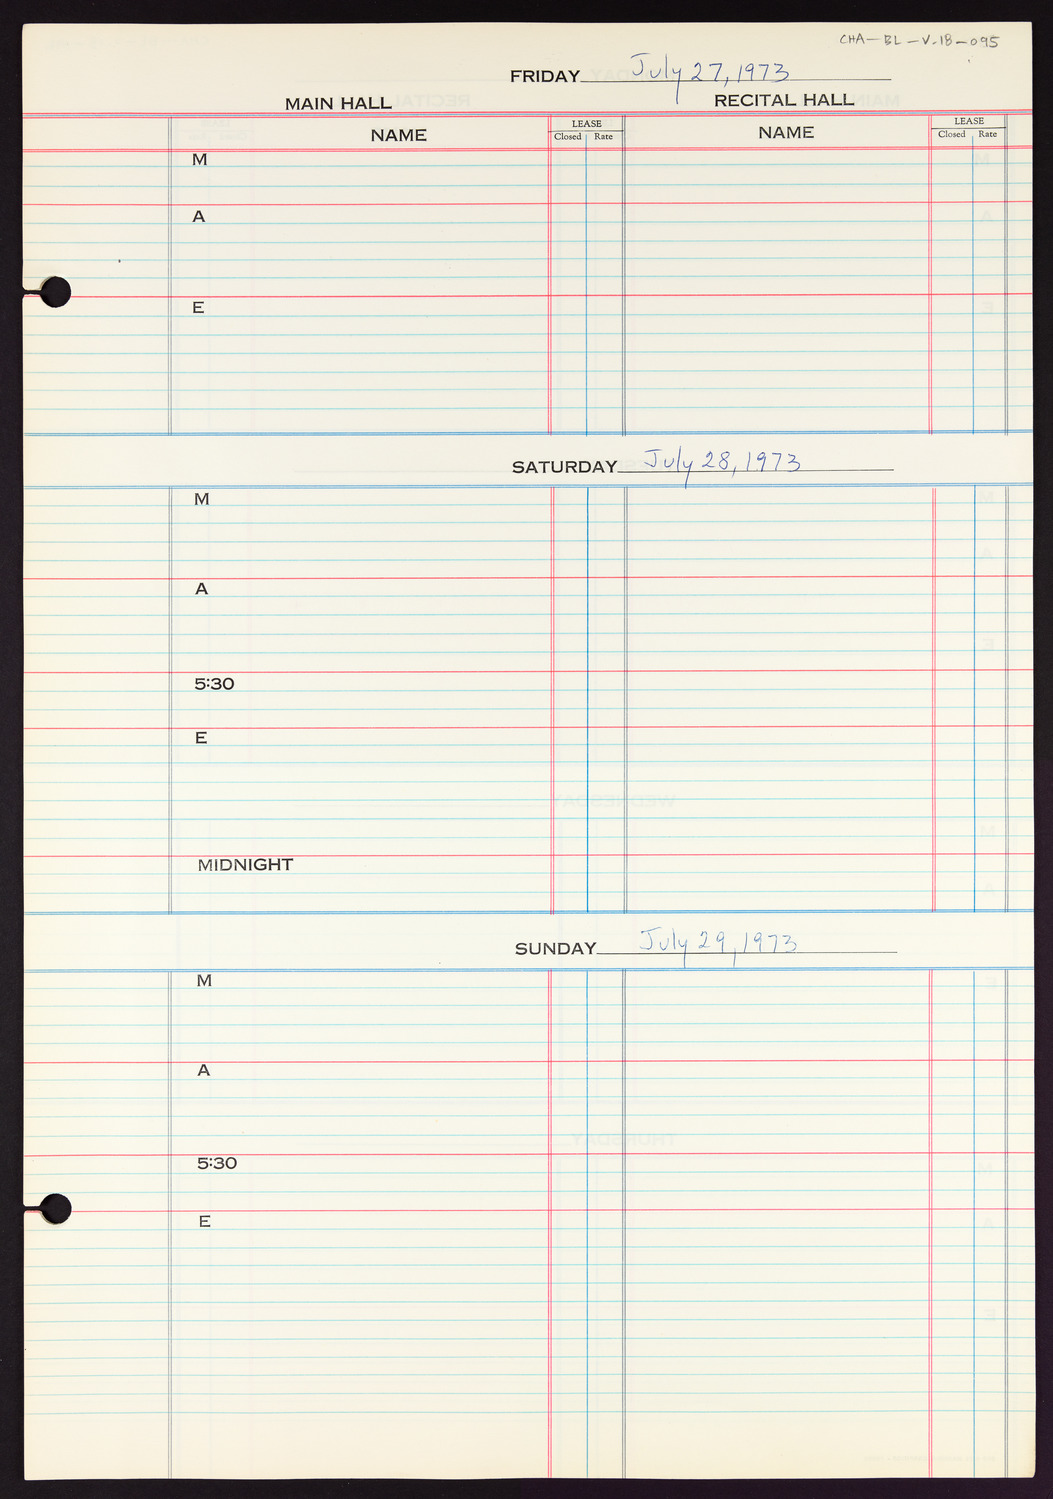 Carnegie Hall Booking Ledger, volume 18, page 95